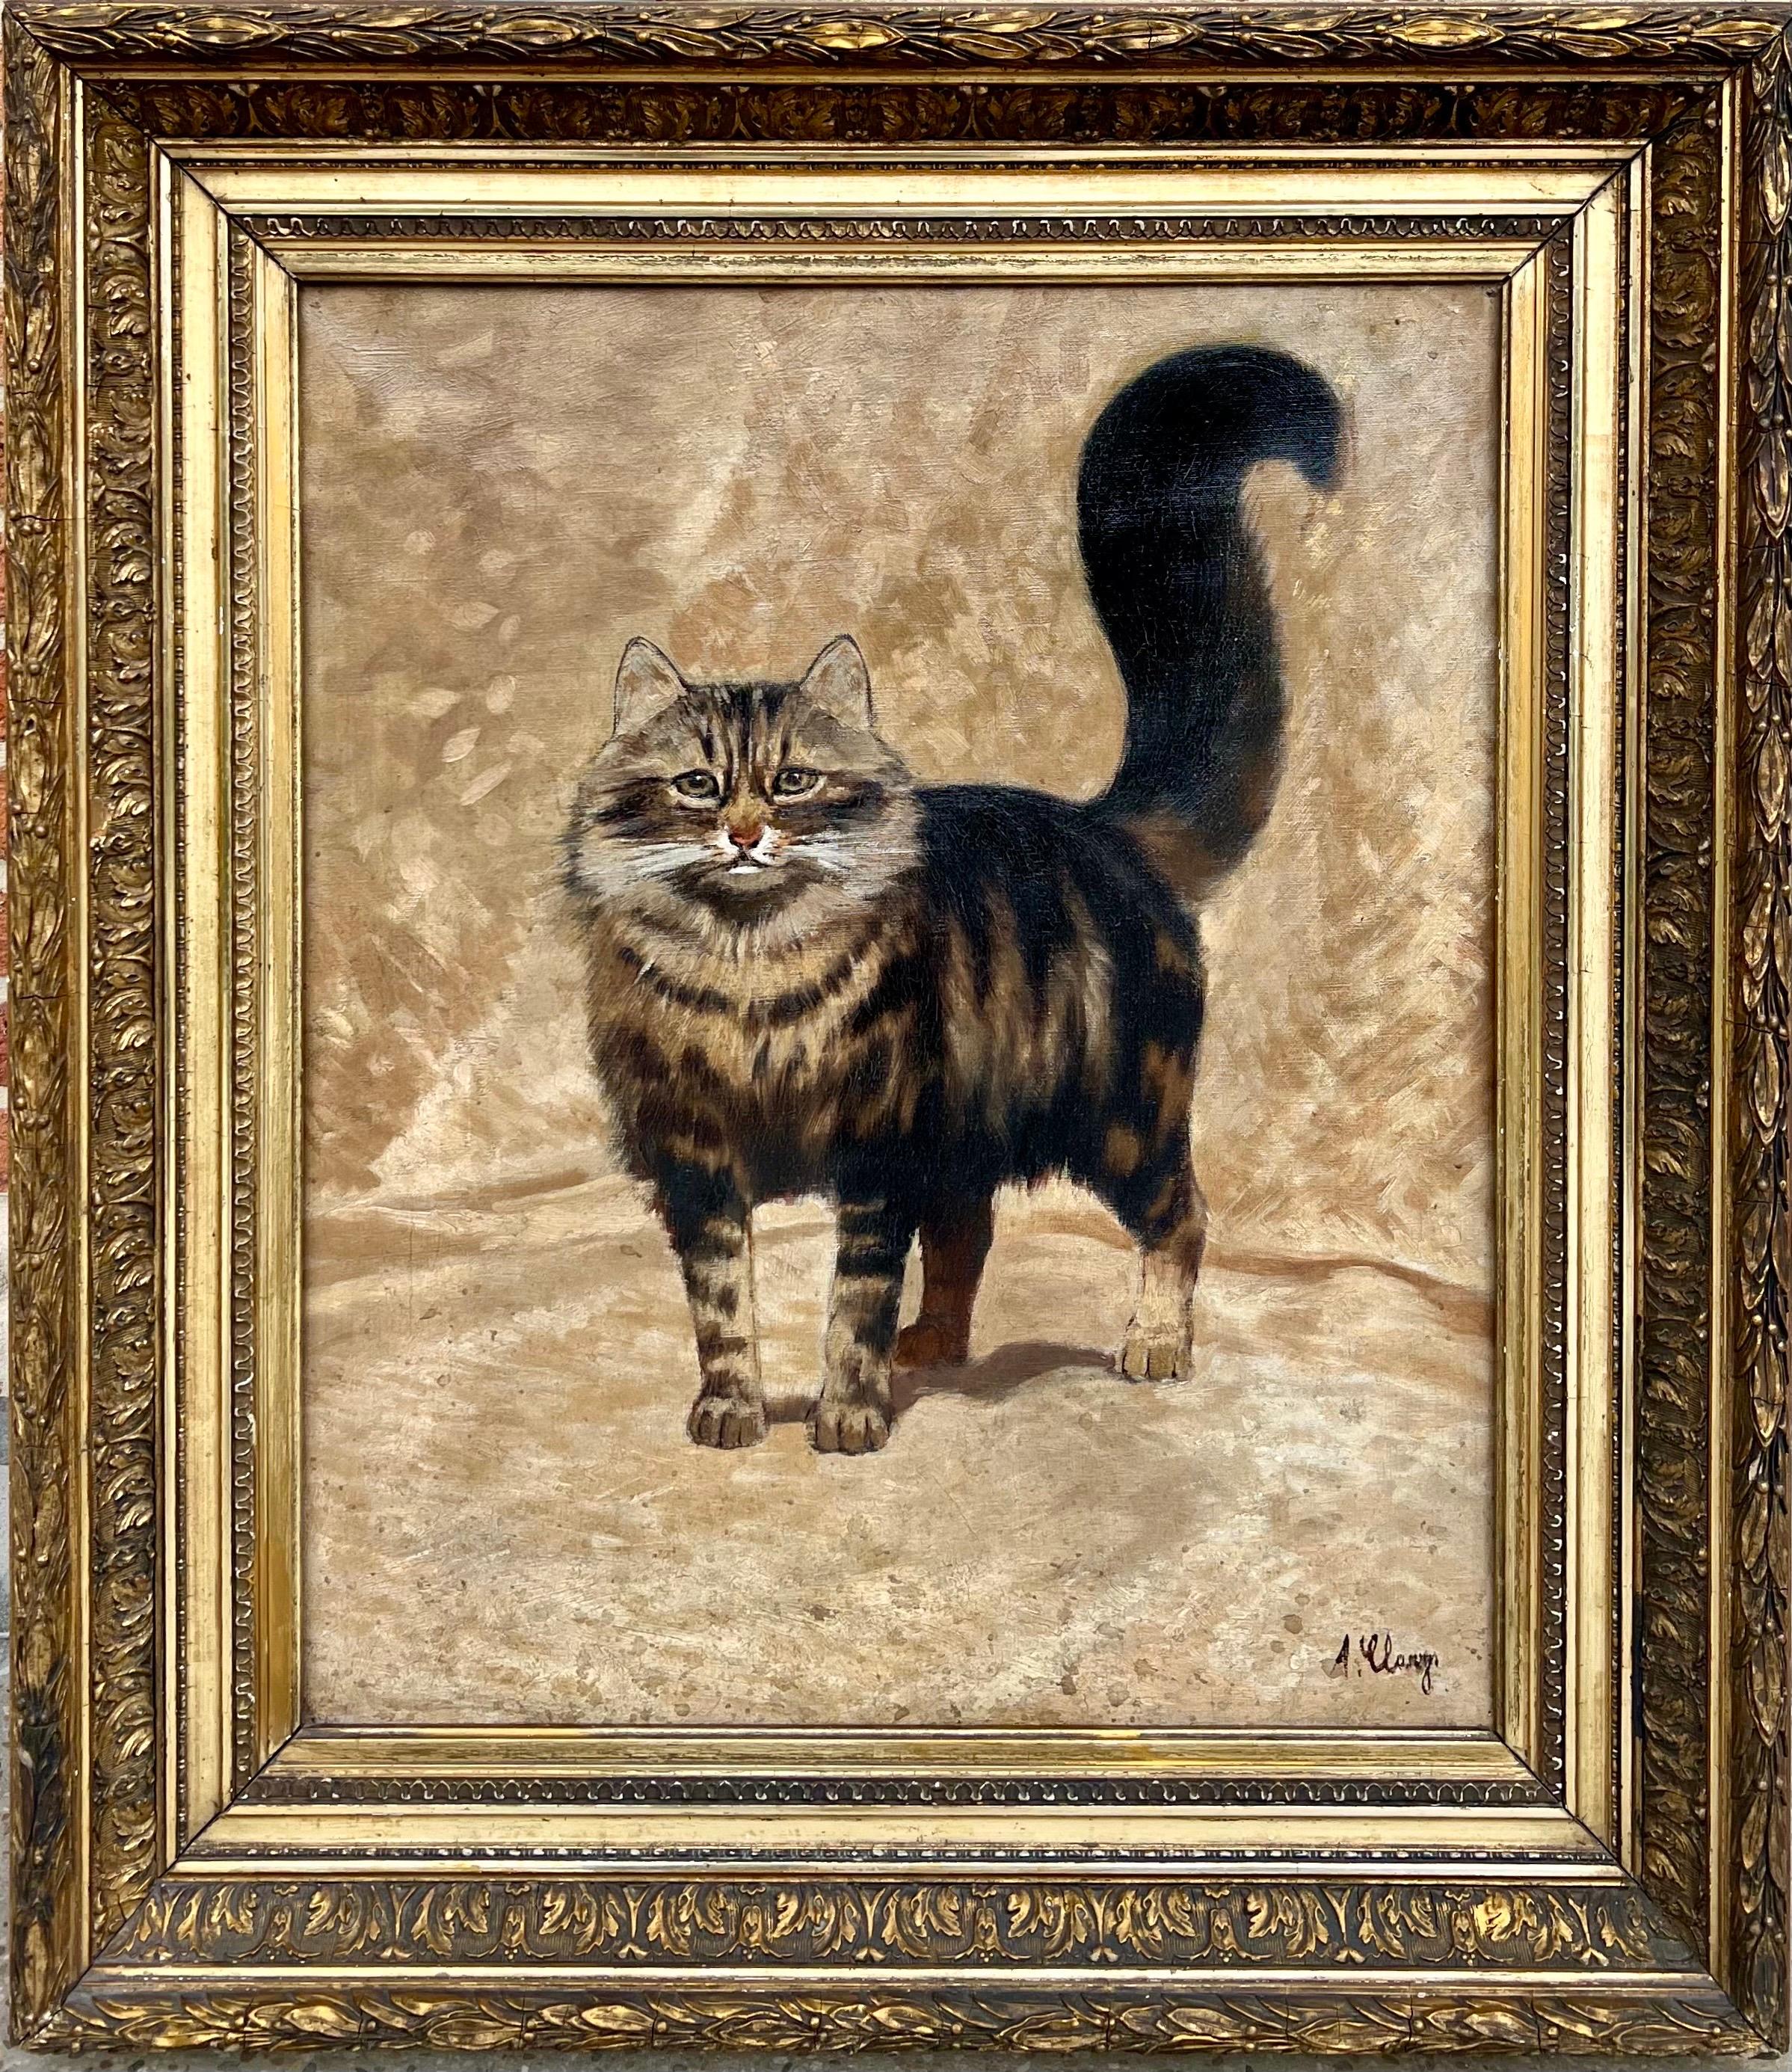 Alexandre Clarys Animal Painting - 19th century cat portrait painting - "Le Chat " - Ragamuffin - Maine coon